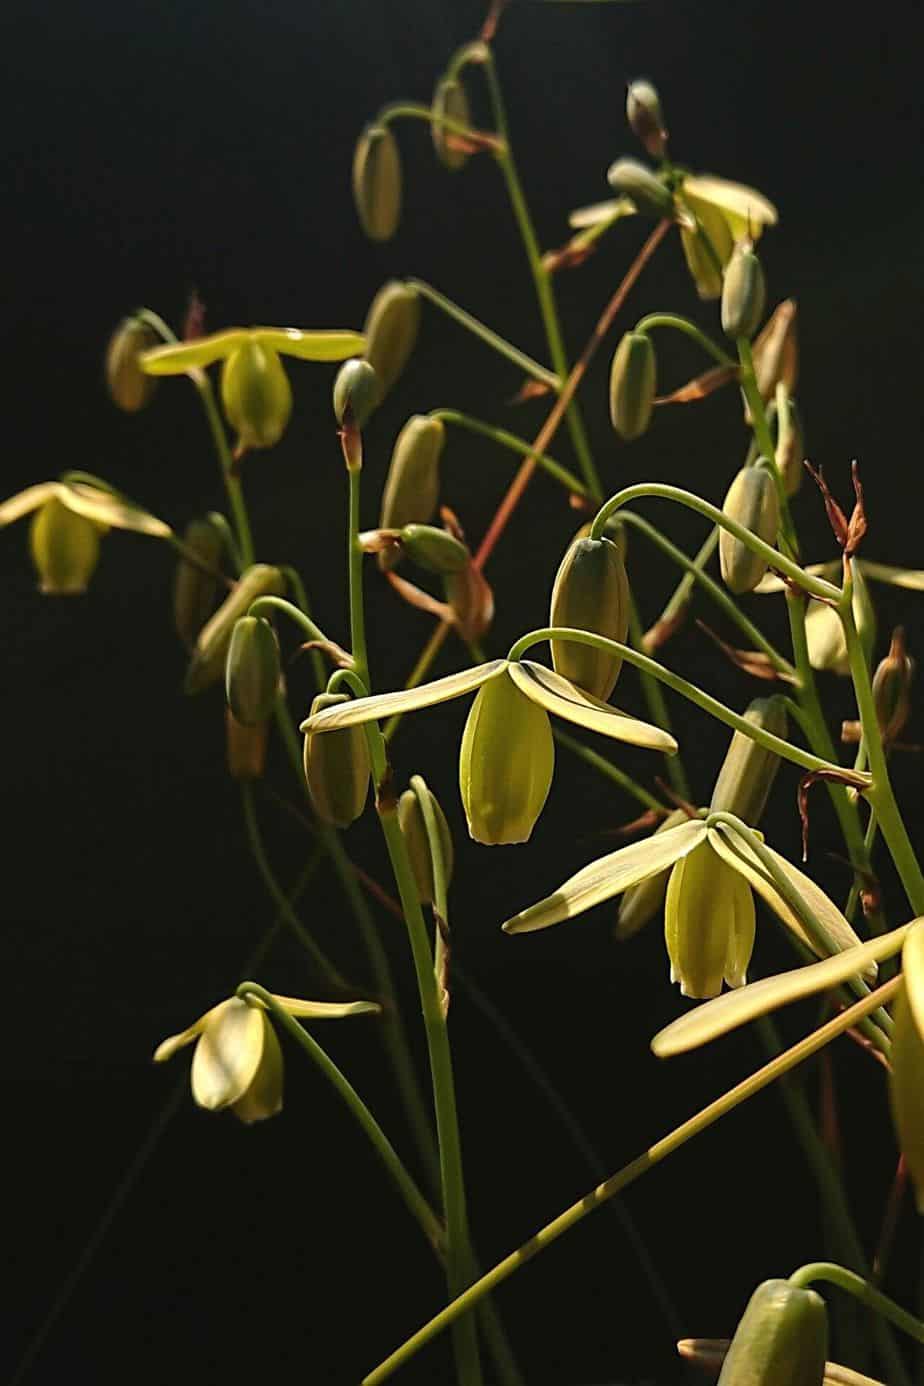 If you're looking for a vanilla-like smelling plant, then the Bulb Albuca Namaquensis is a great plant to grow by your southeast-facing window